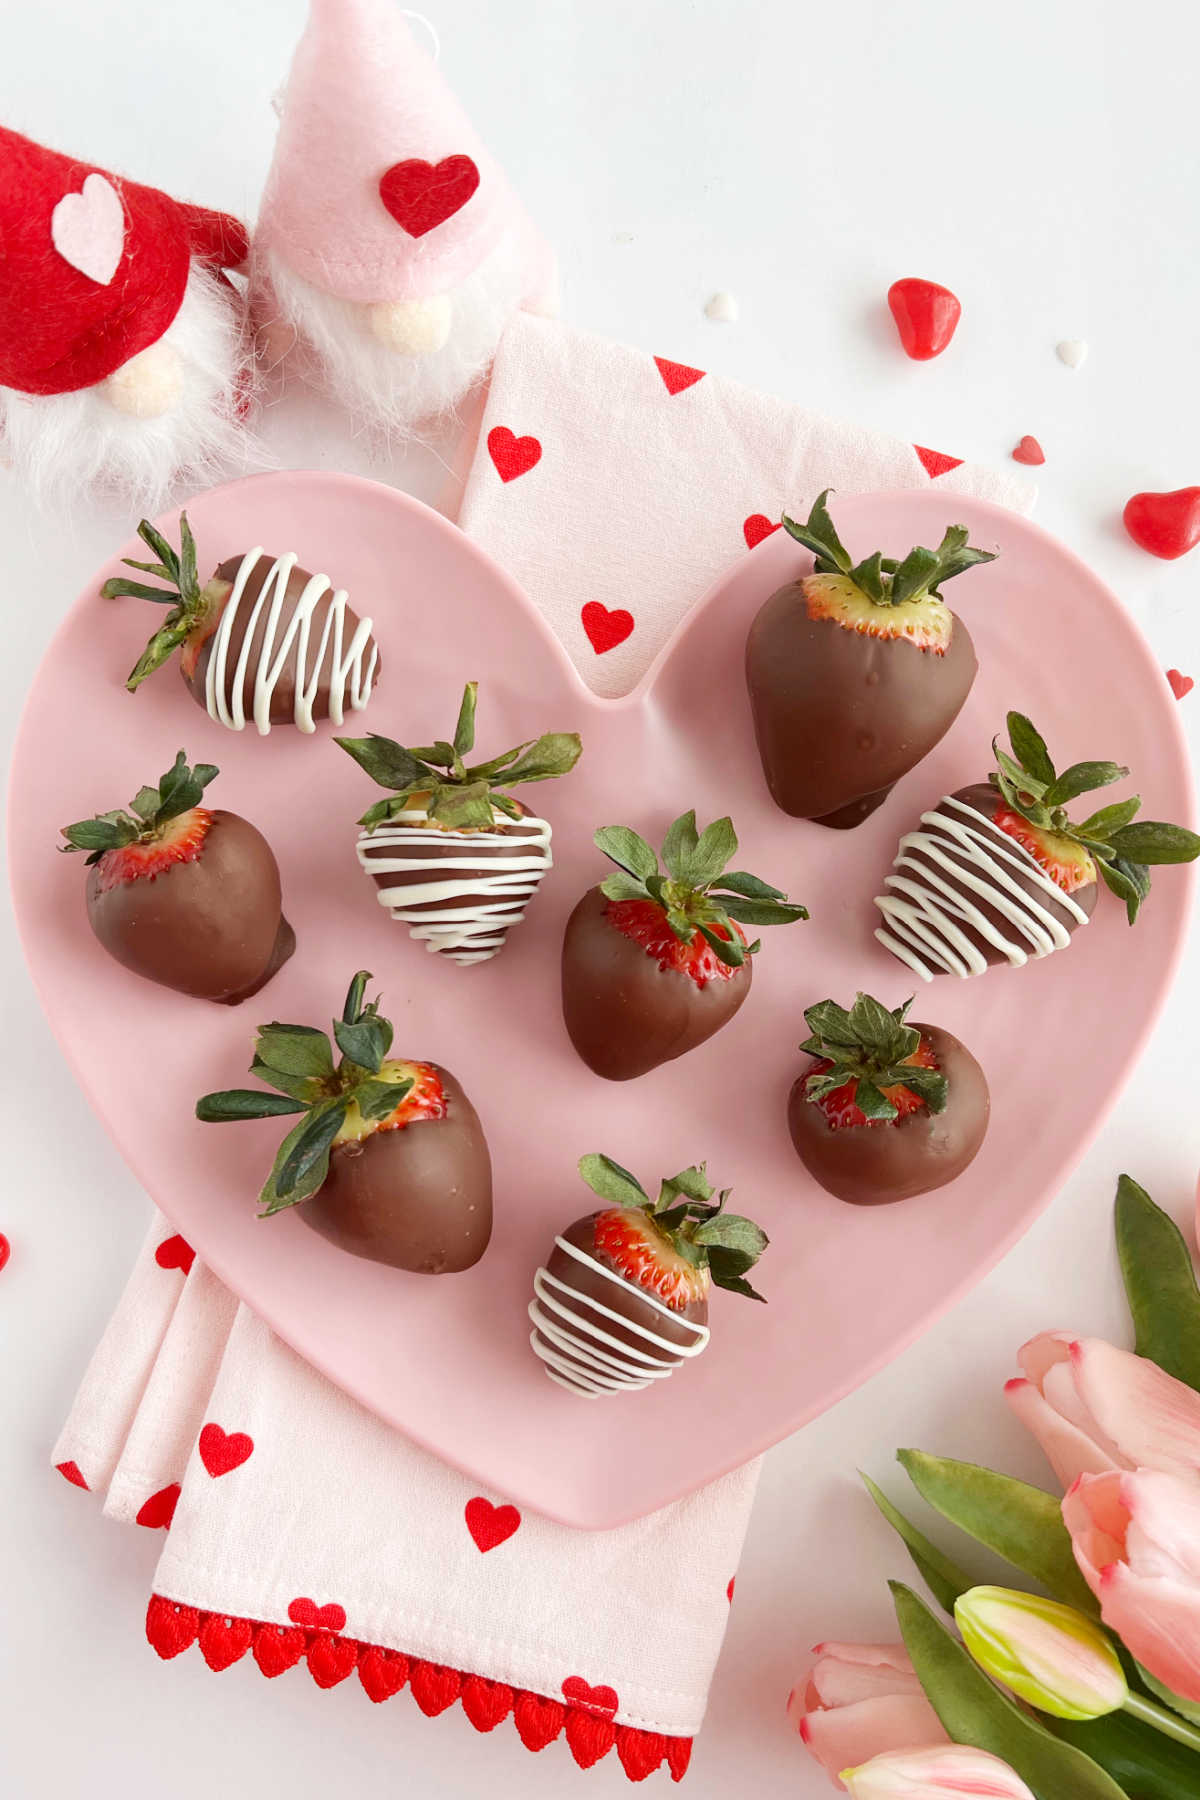 chocolate covered strawberries for Valentine's Day or mothere's day on pink heart plate